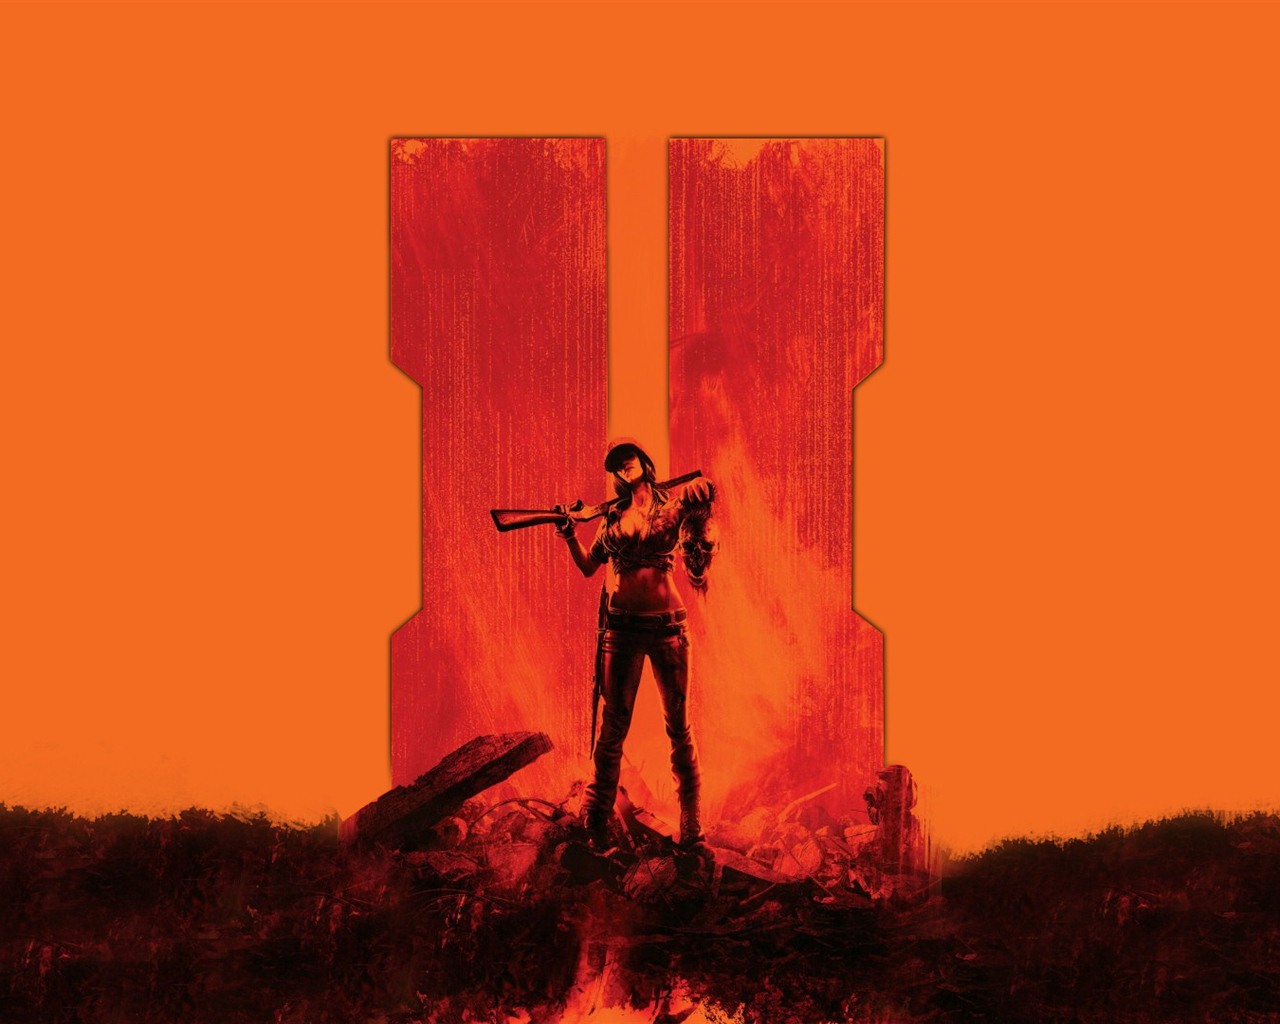 Call of Duty: Black Ops 2 HD wallpapers #3 - 1280x1024